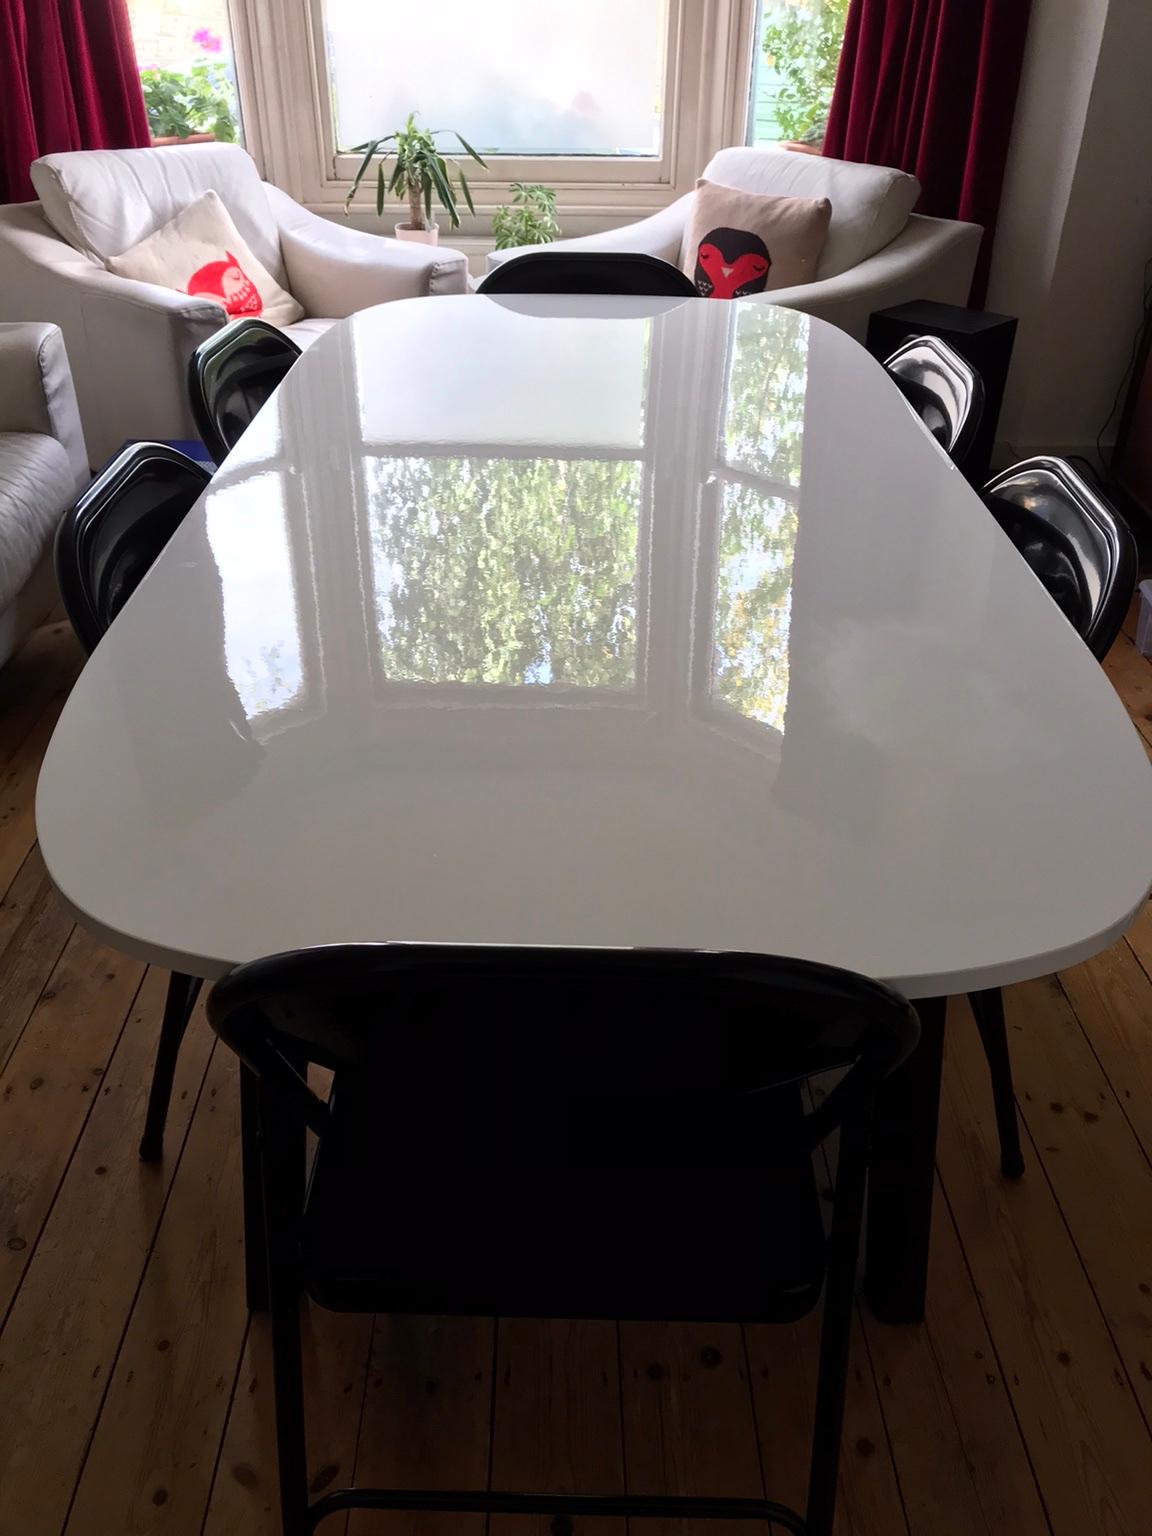 Ikea Oppeby 6 seater dining table 185x90cm in SE4 Lewisham 